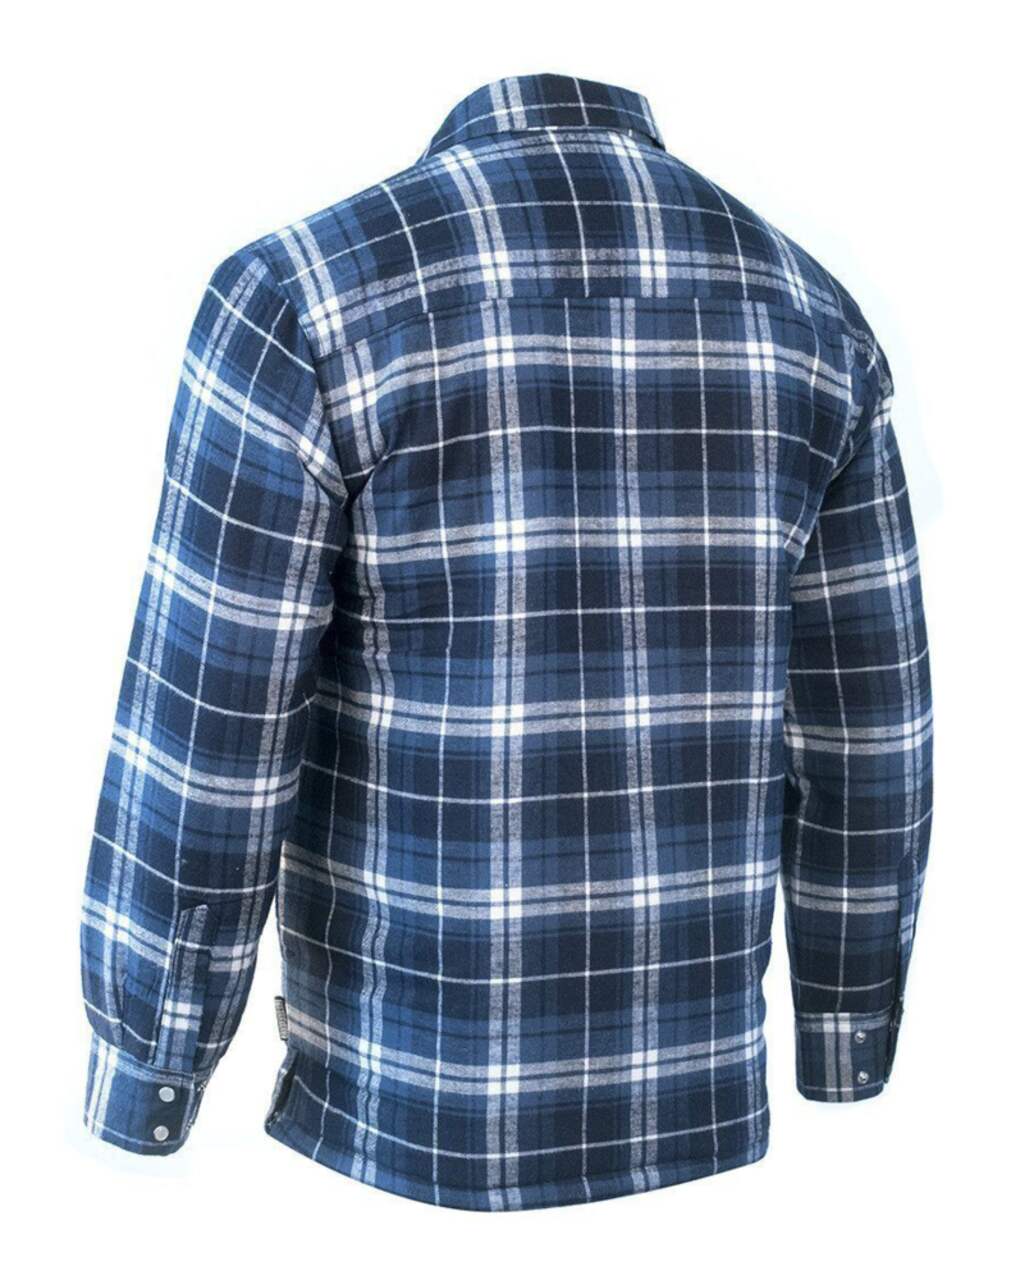 Forcefield Quilted Cotton Flannel Plaid Shirt for Fishing/Hiking